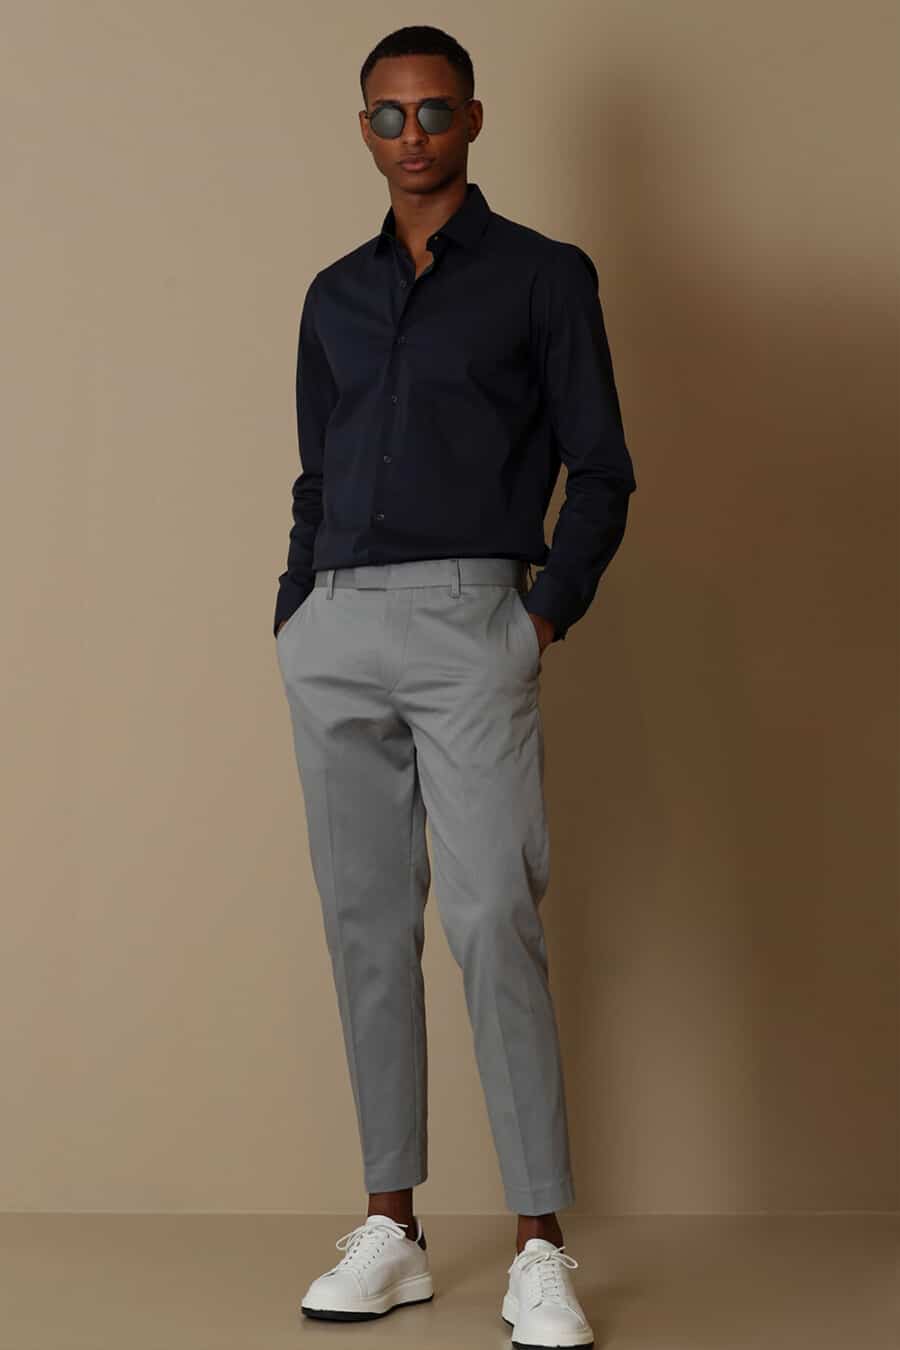 Men's cropped grey pants, black tucked in shirt and white sneakers outfit